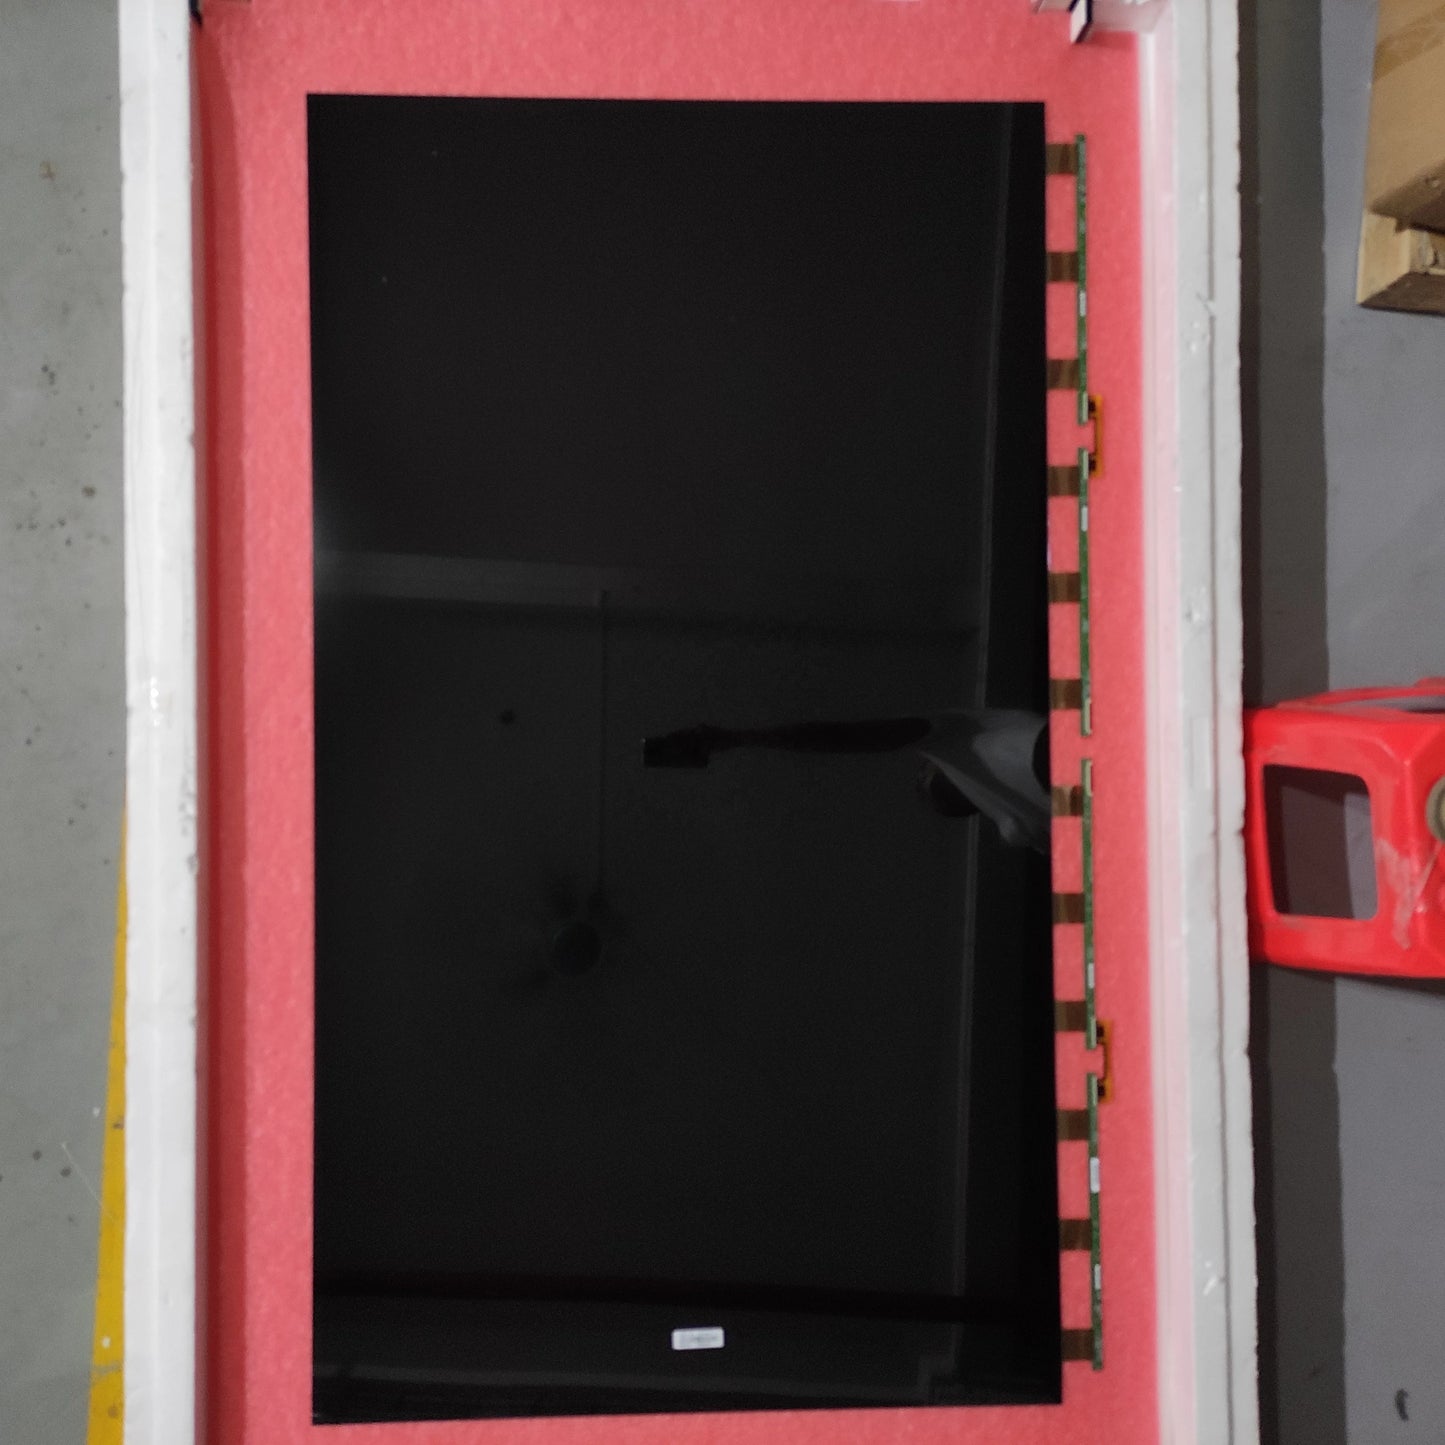 HV750QUB-N9D 51 pins BOE 75" inch LCD LED TFT Display Open Cell TV Screen Spare Panel Replacement Parts for TV Repair